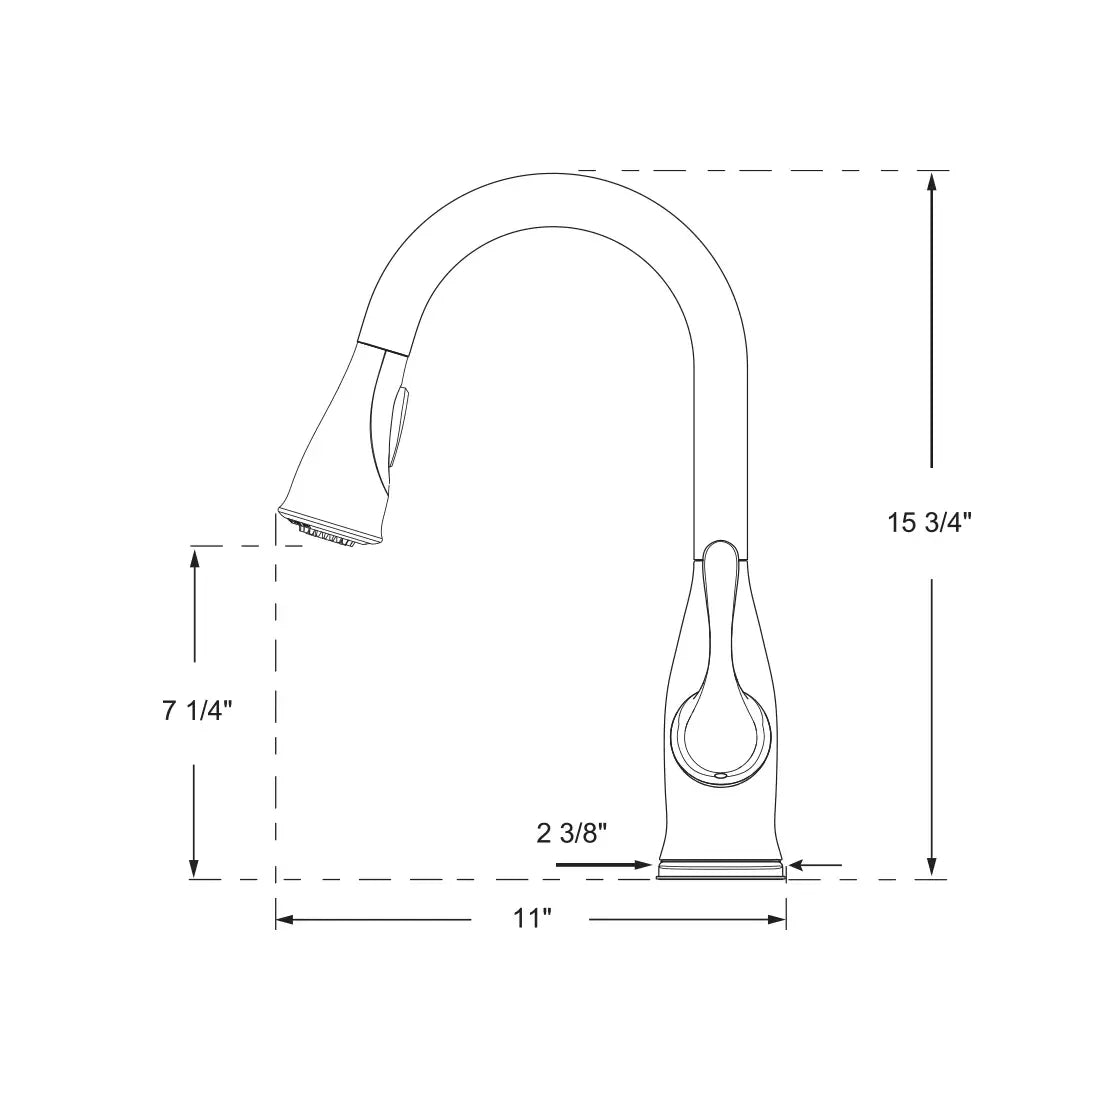 Technical Drawing of a Single Handle Pull Down Kitchen Faucet 